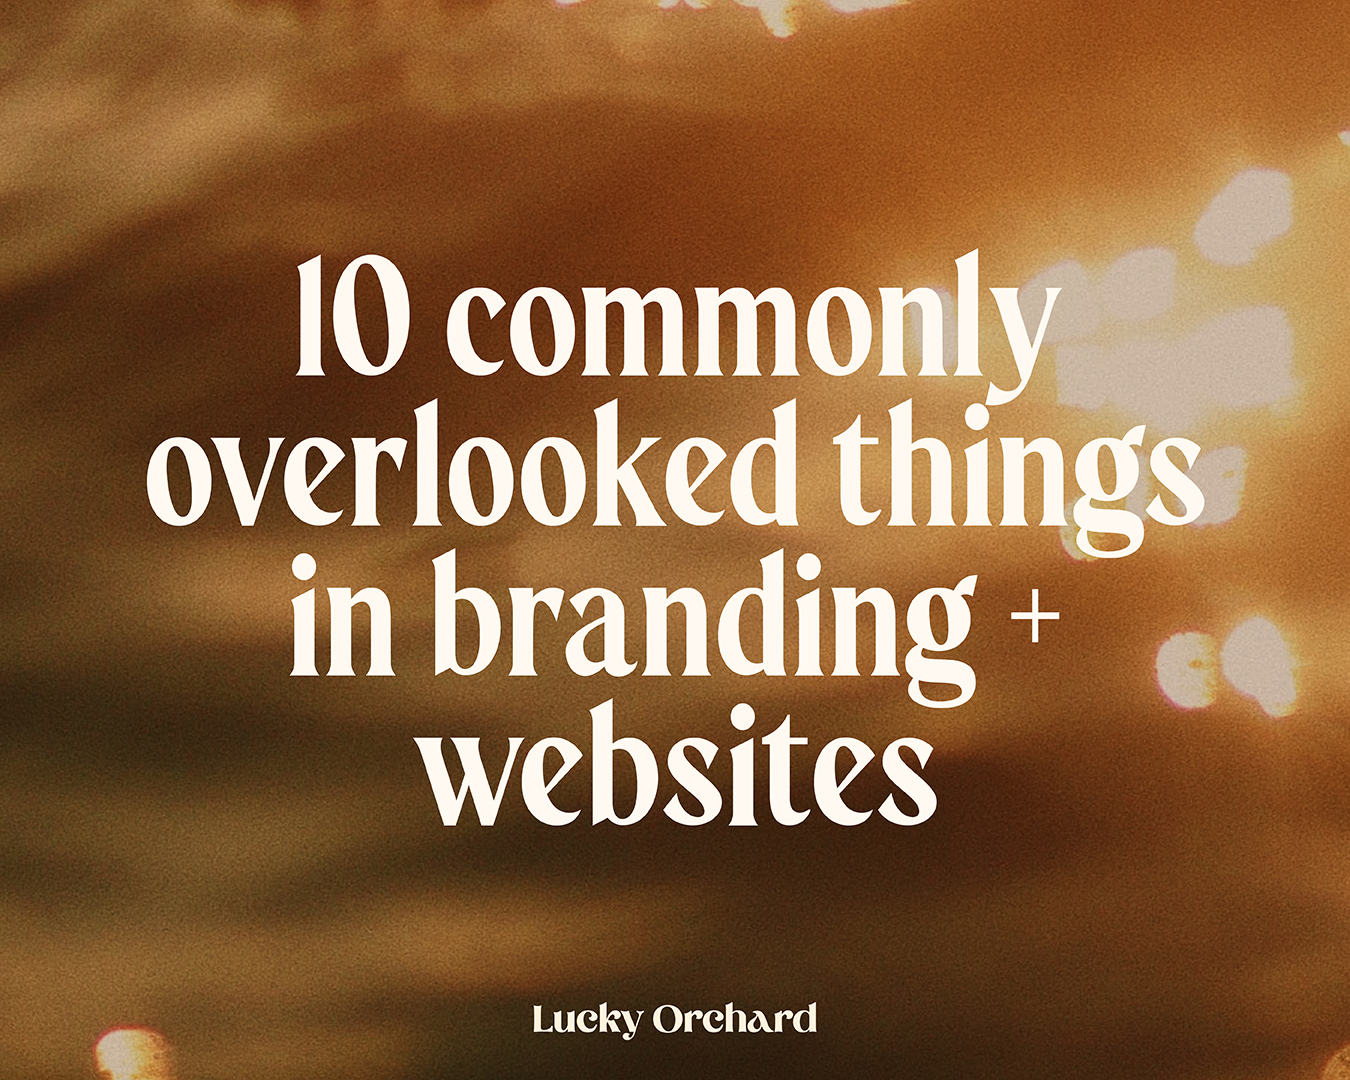 10 commonly overlooked things in branding + websites by Lucky Orchard (branding and web design studio